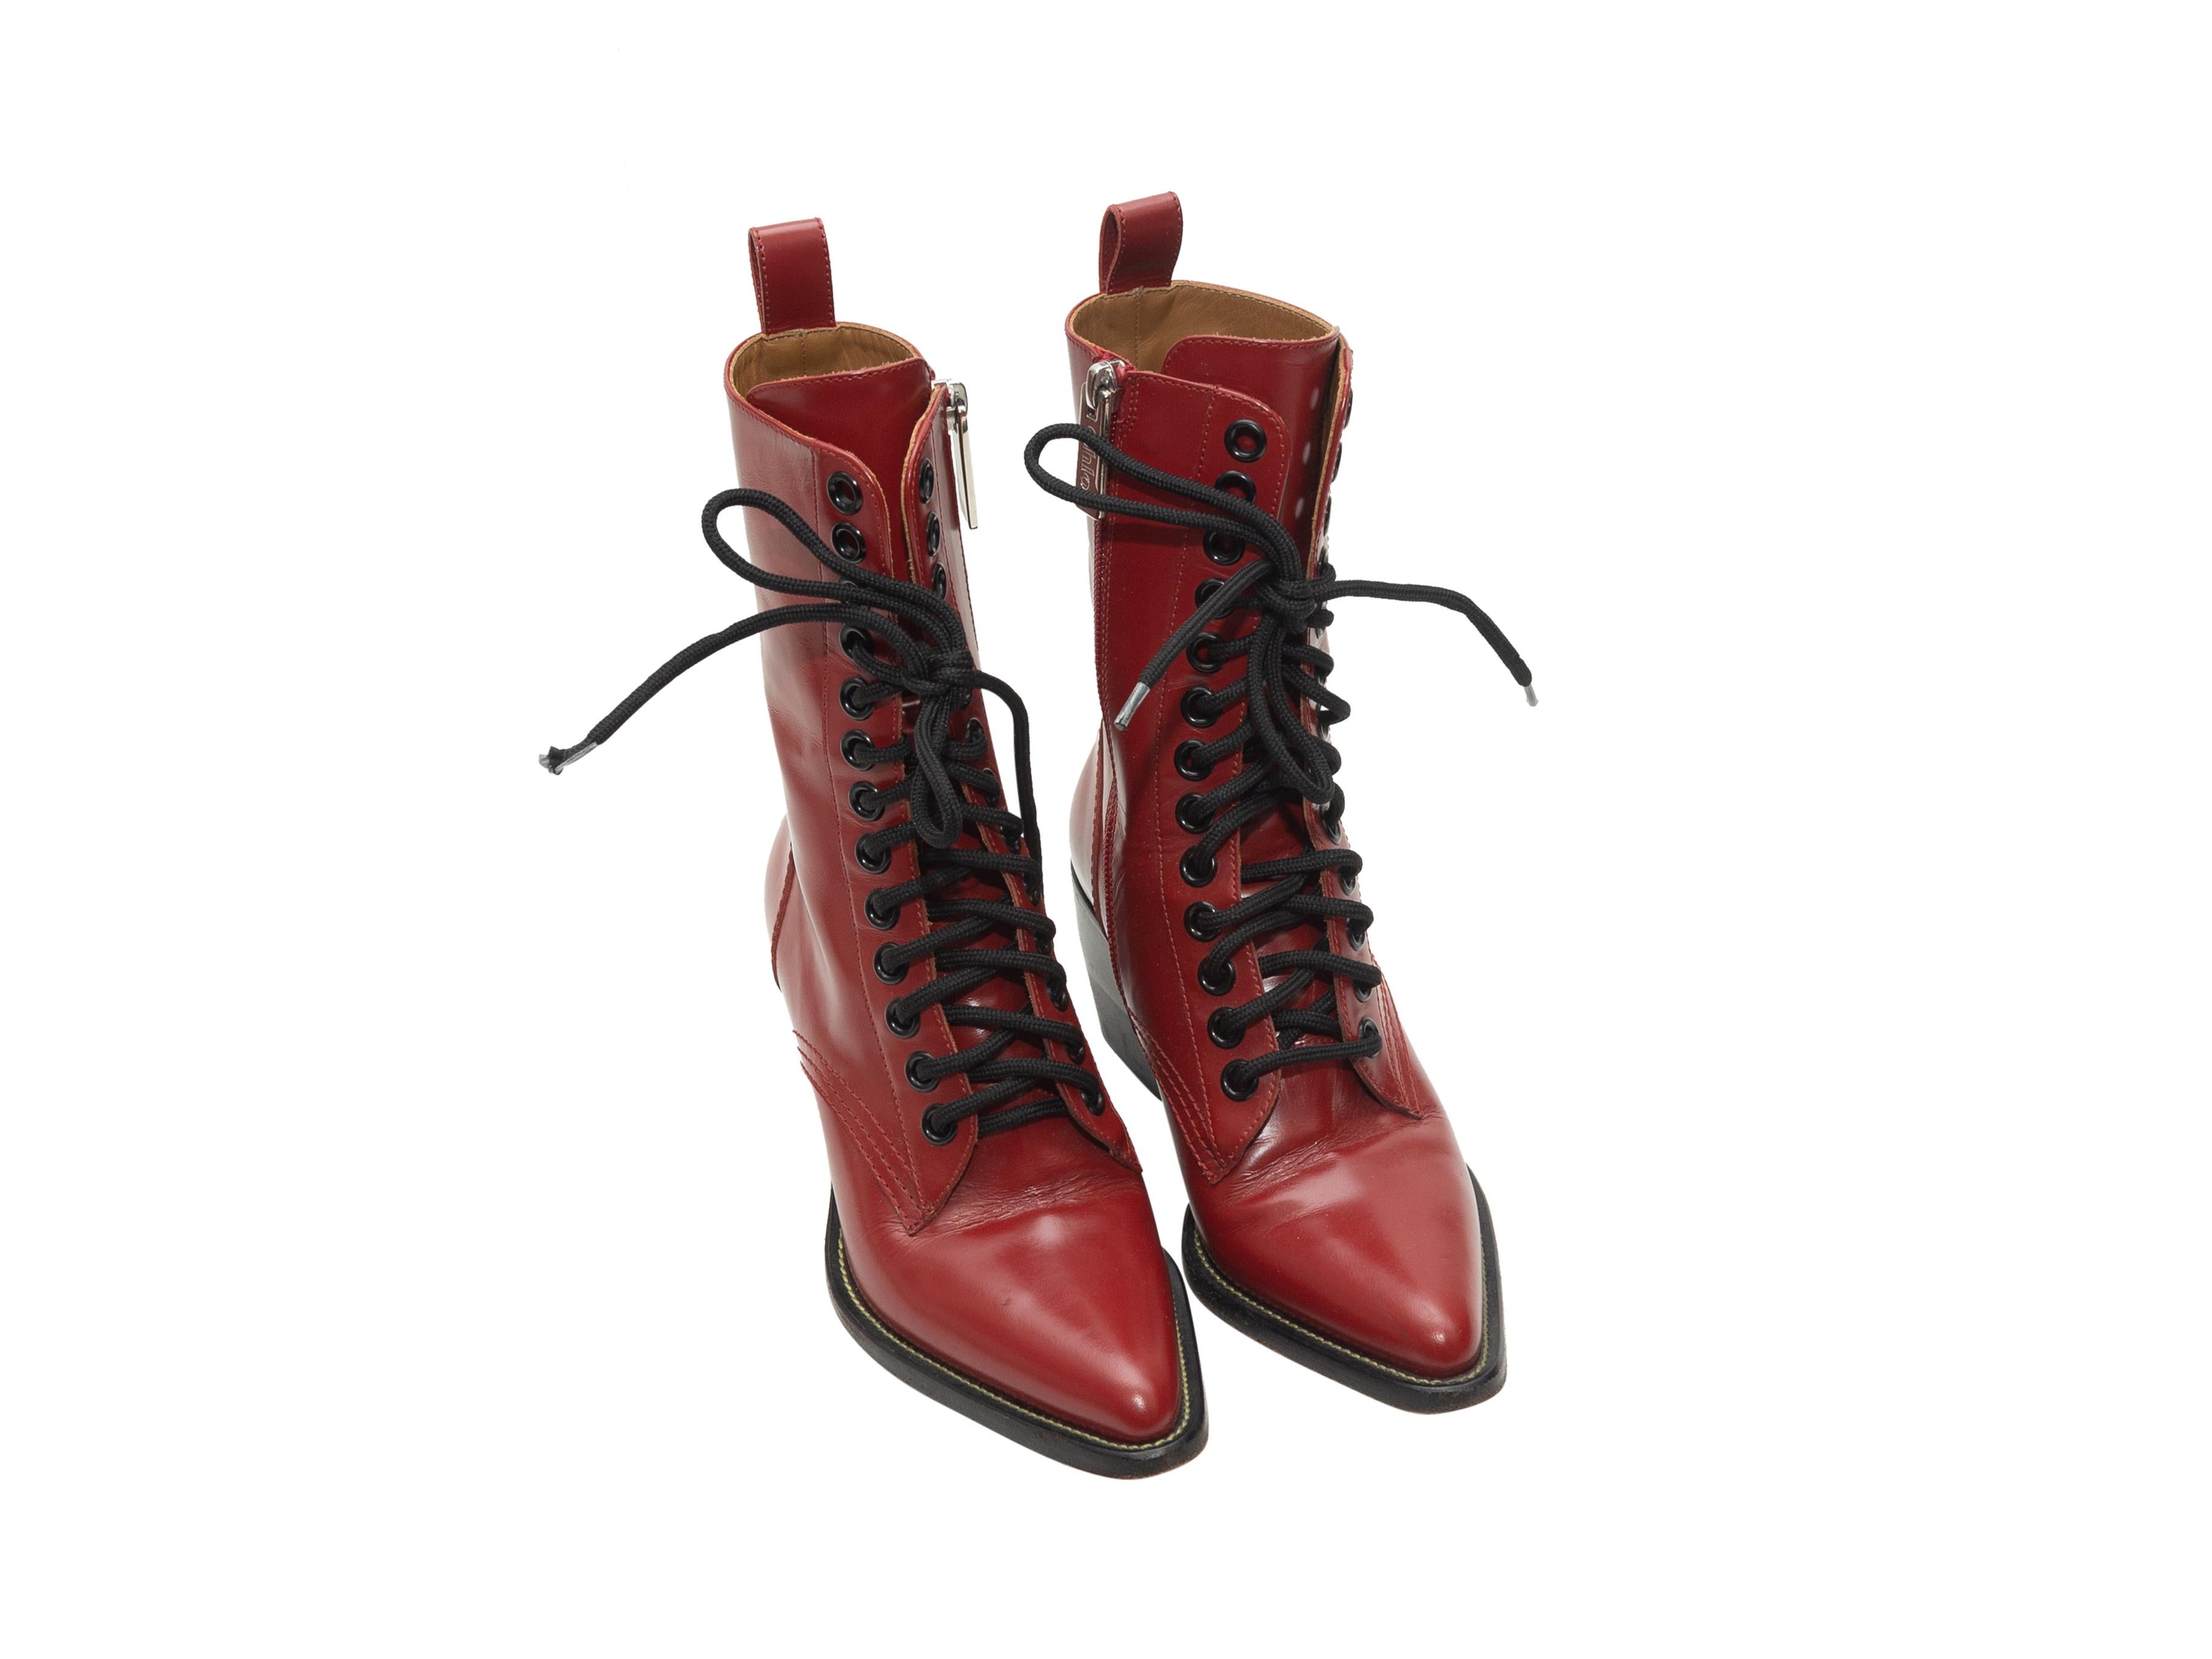 Product details: Red leather pointed-toe Rylee boots by Chloe. Lace-up detailing at tops. Block heels. Zip closures at inner sides. Designer size 36.5. 2.5